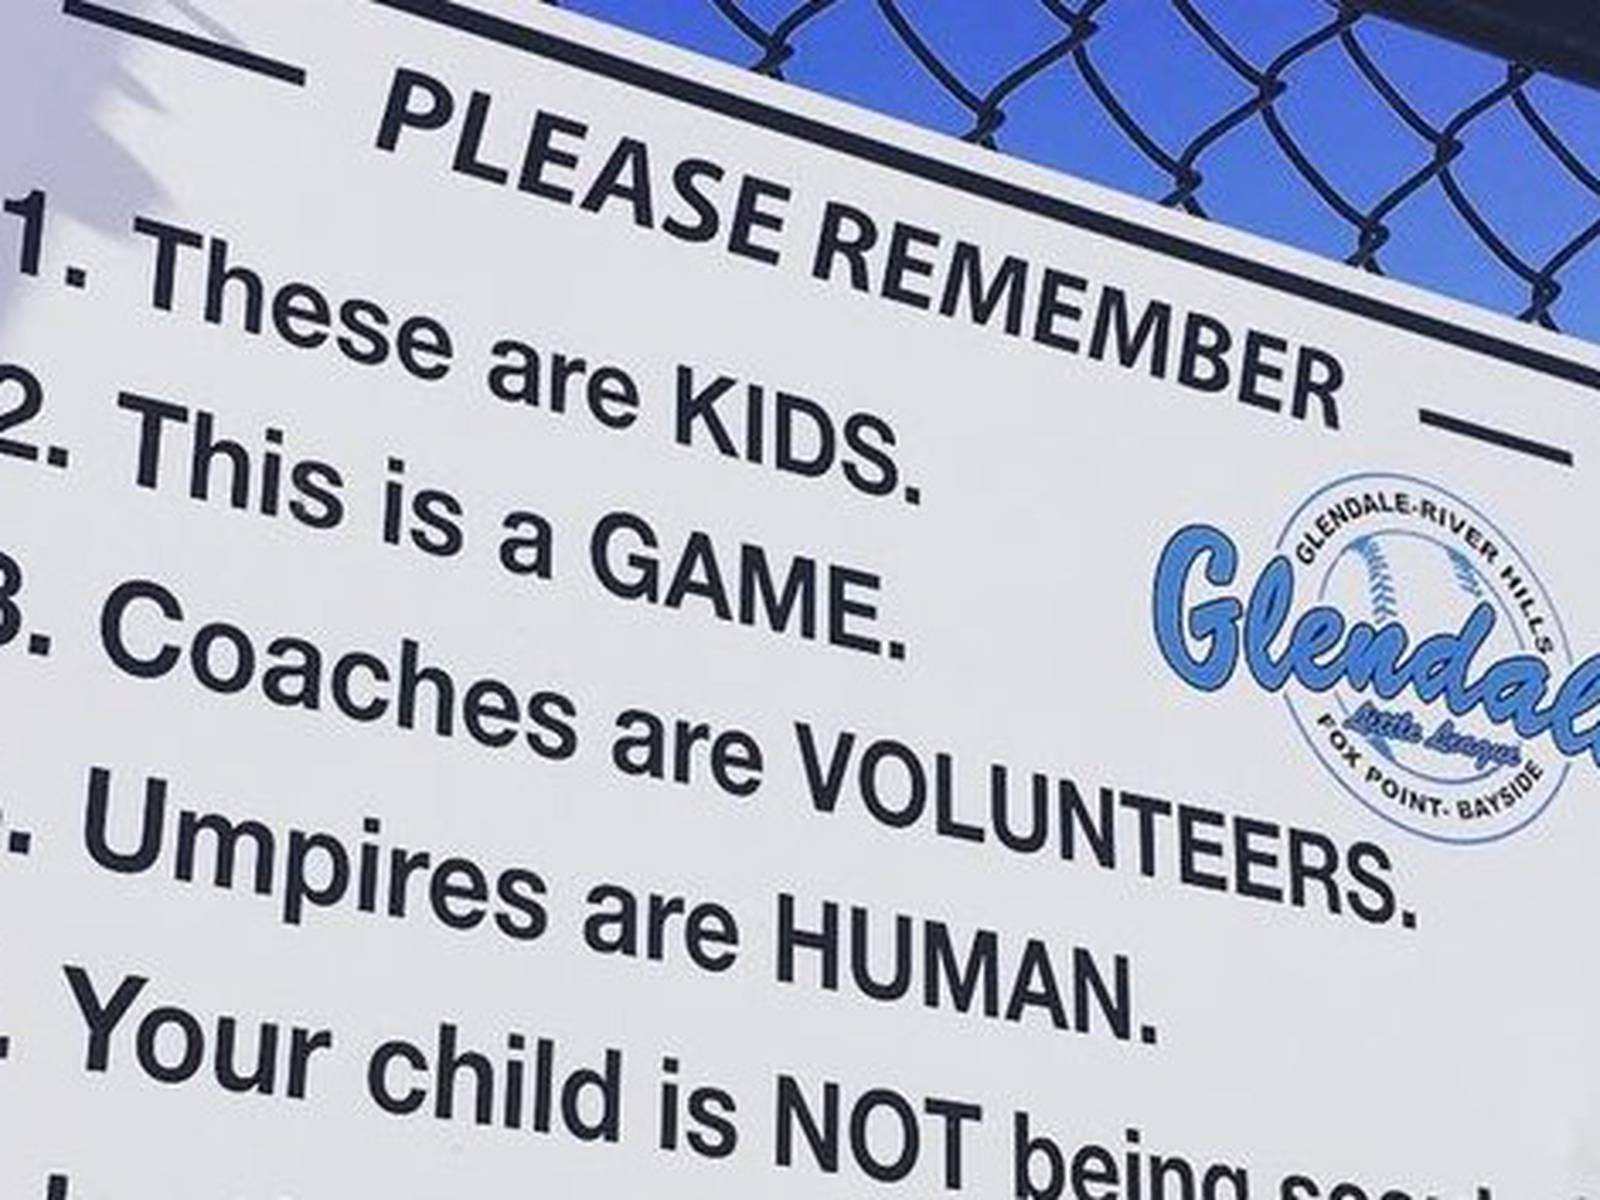 Irish parents of sports-mad kids warned that over-active